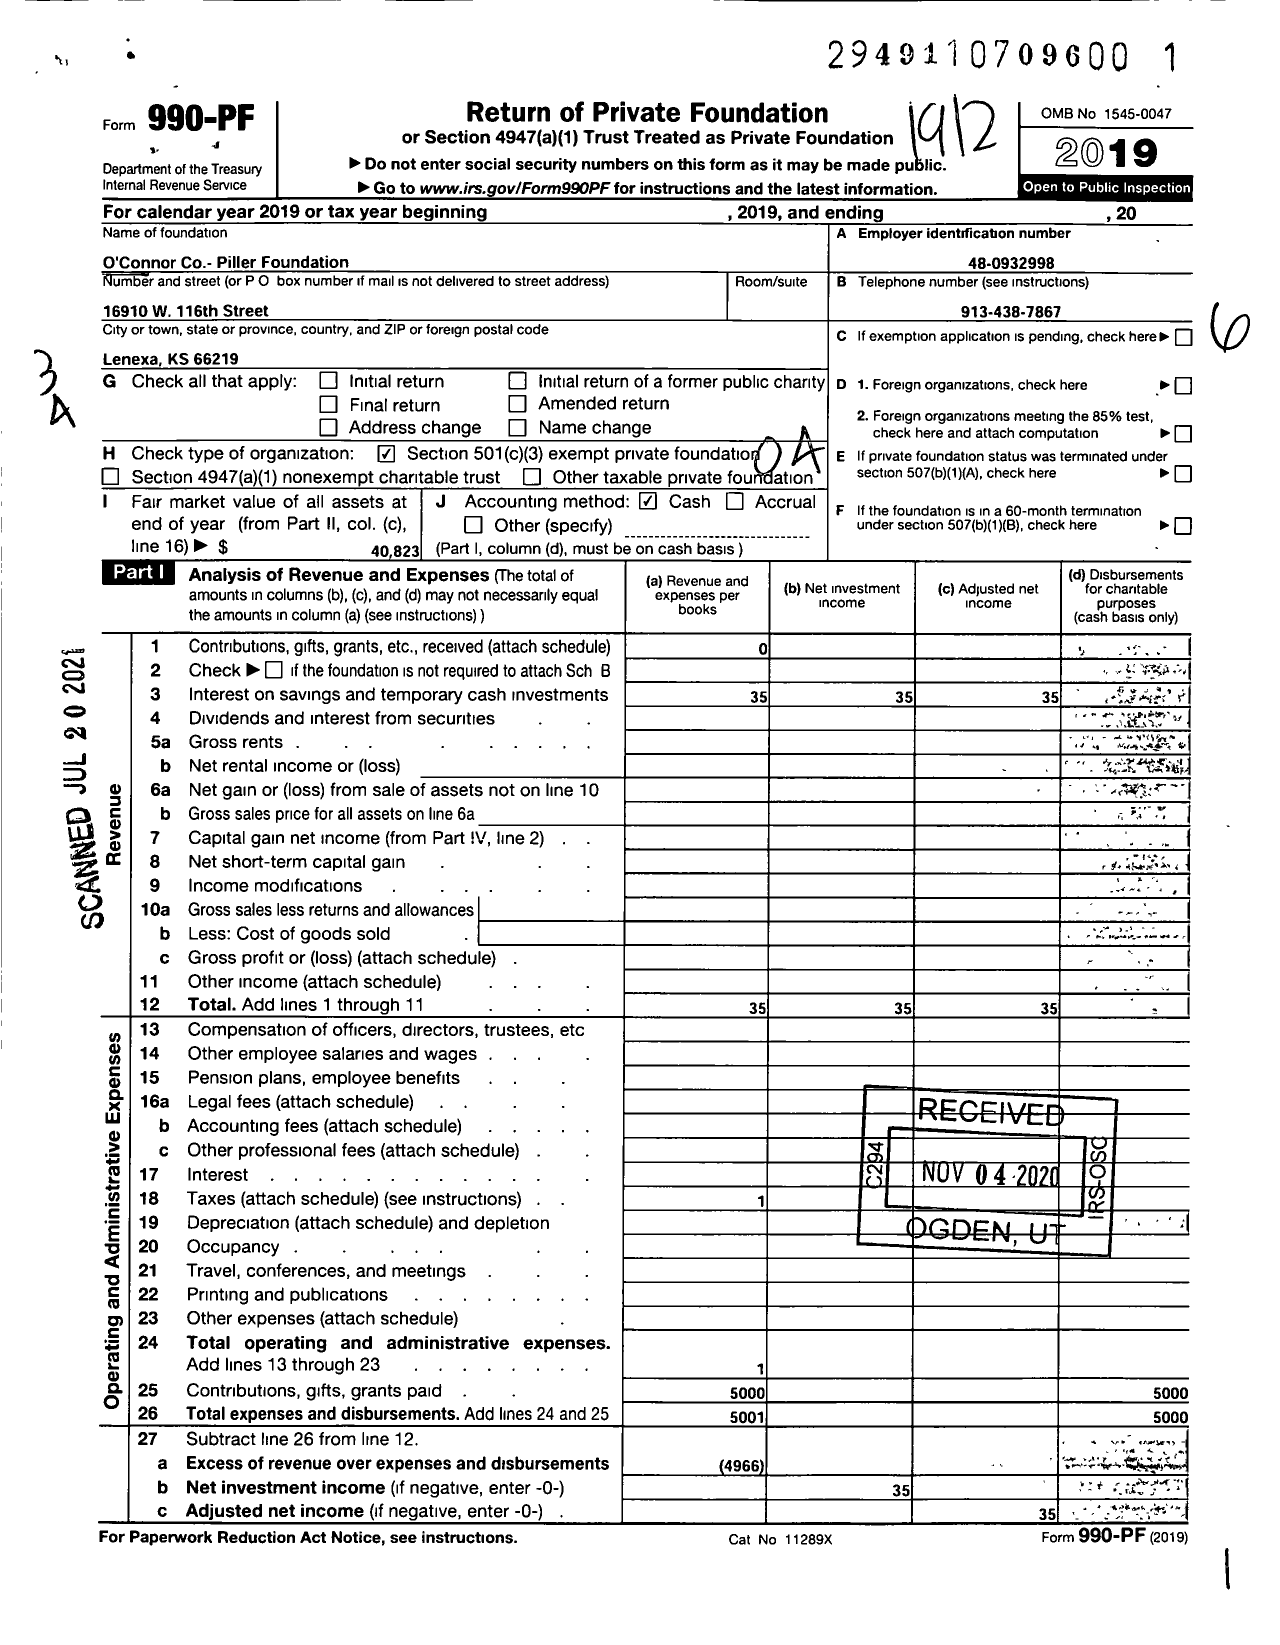 Image of first page of 2019 Form 990PF for O'Connor Co-Piller Foundation